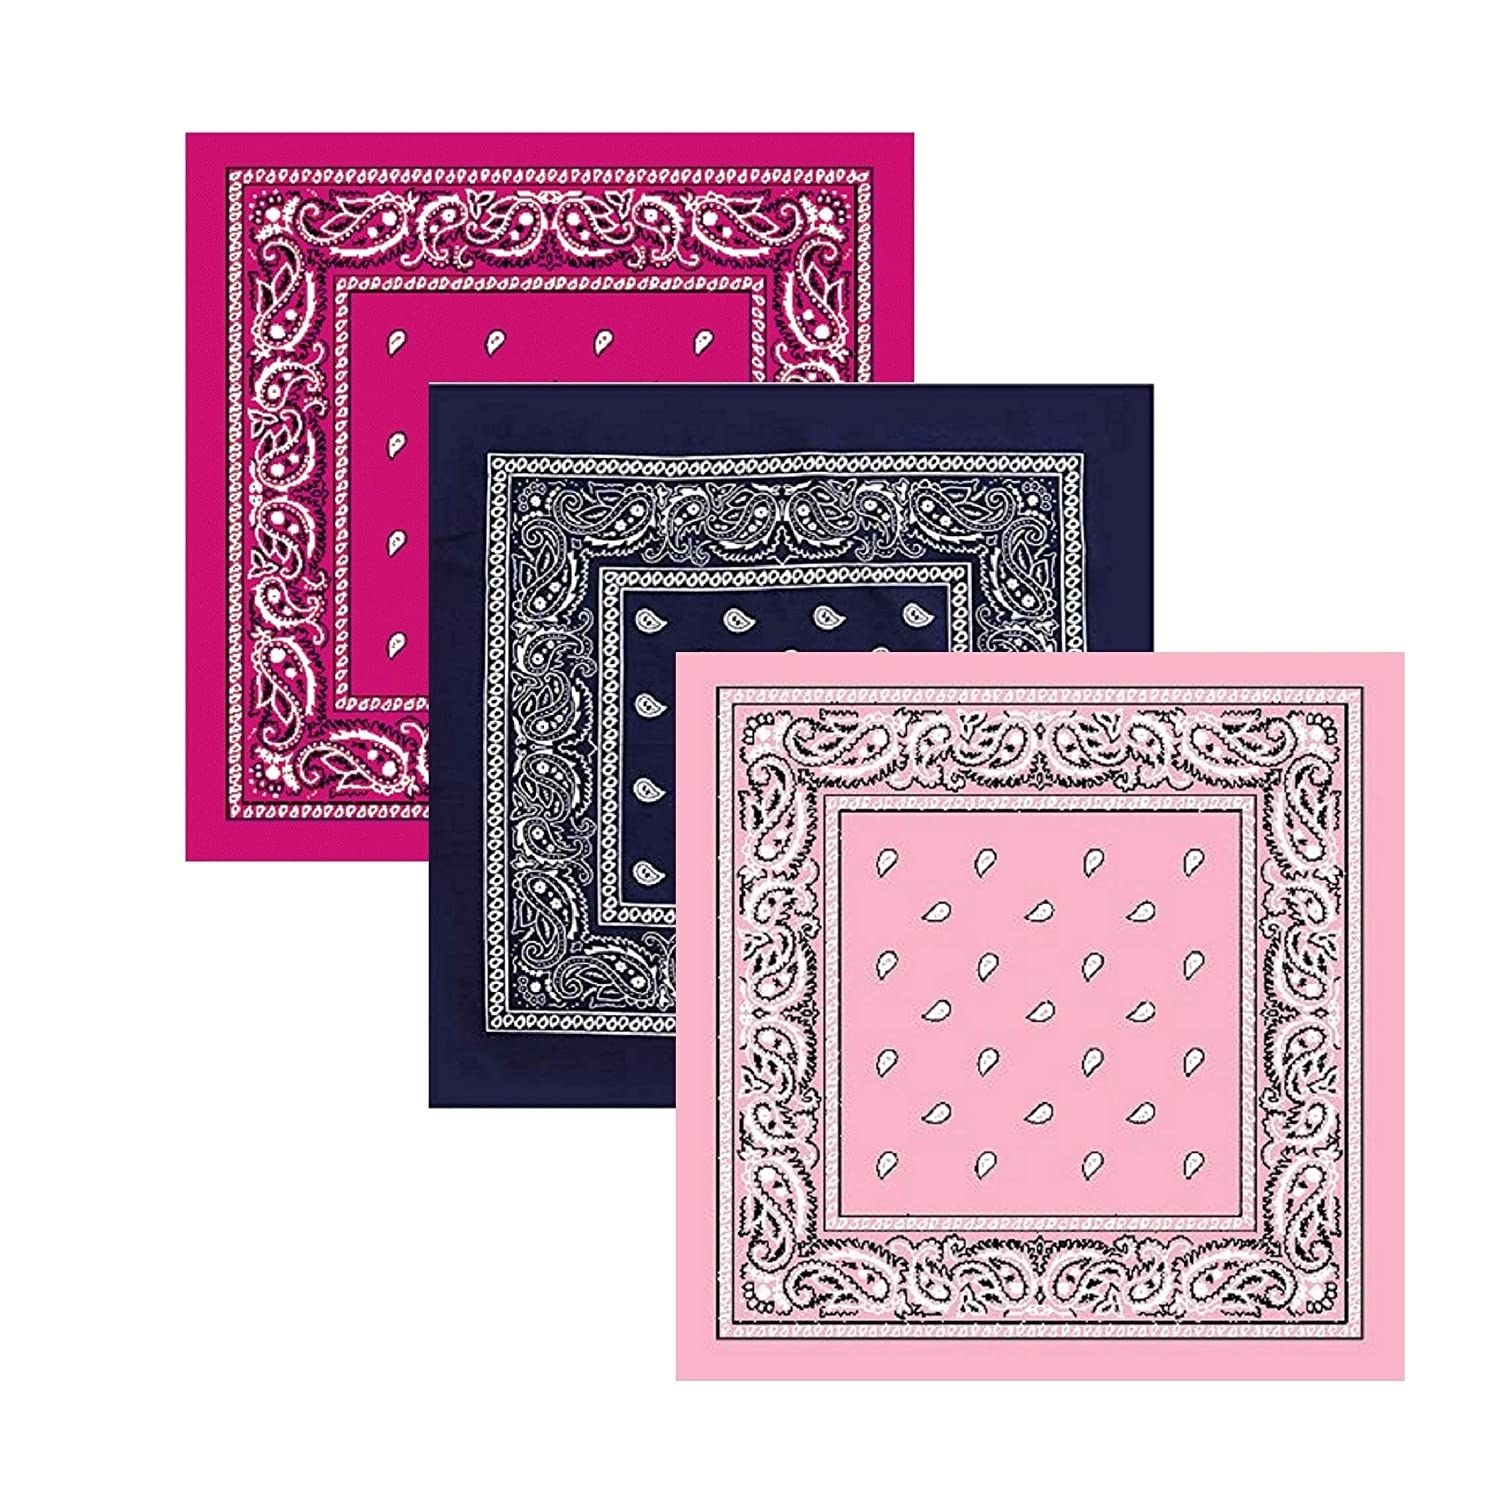 Three bandanas in the colours bright pink, navy blue and pale pink.